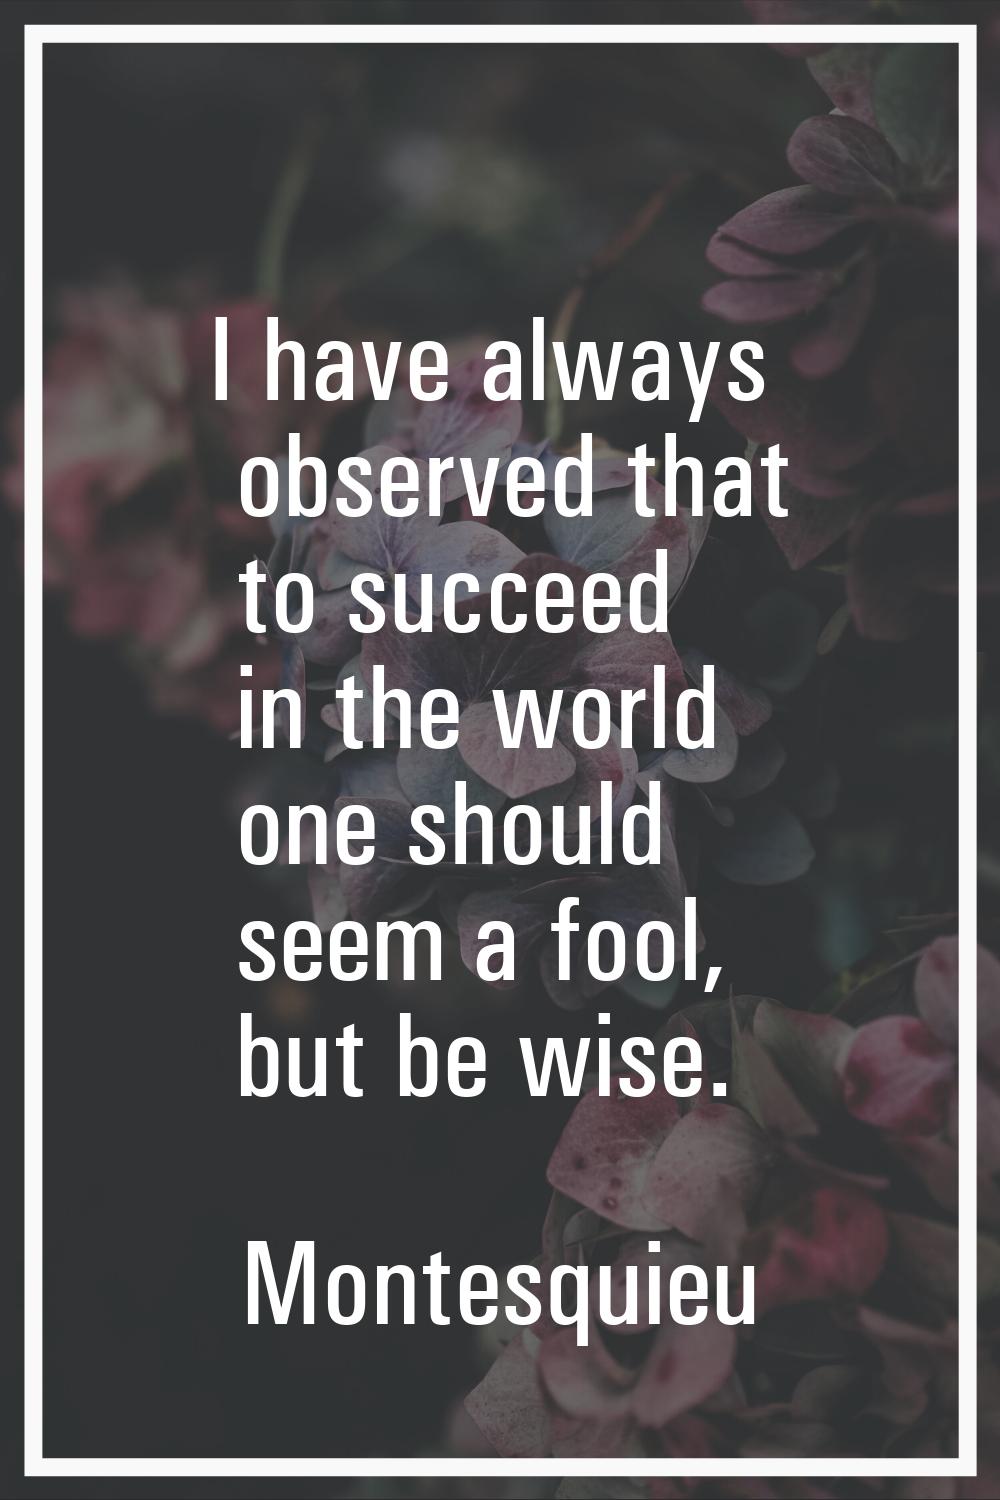 I have always observed that to succeed in the world one should seem a fool, but be wise.